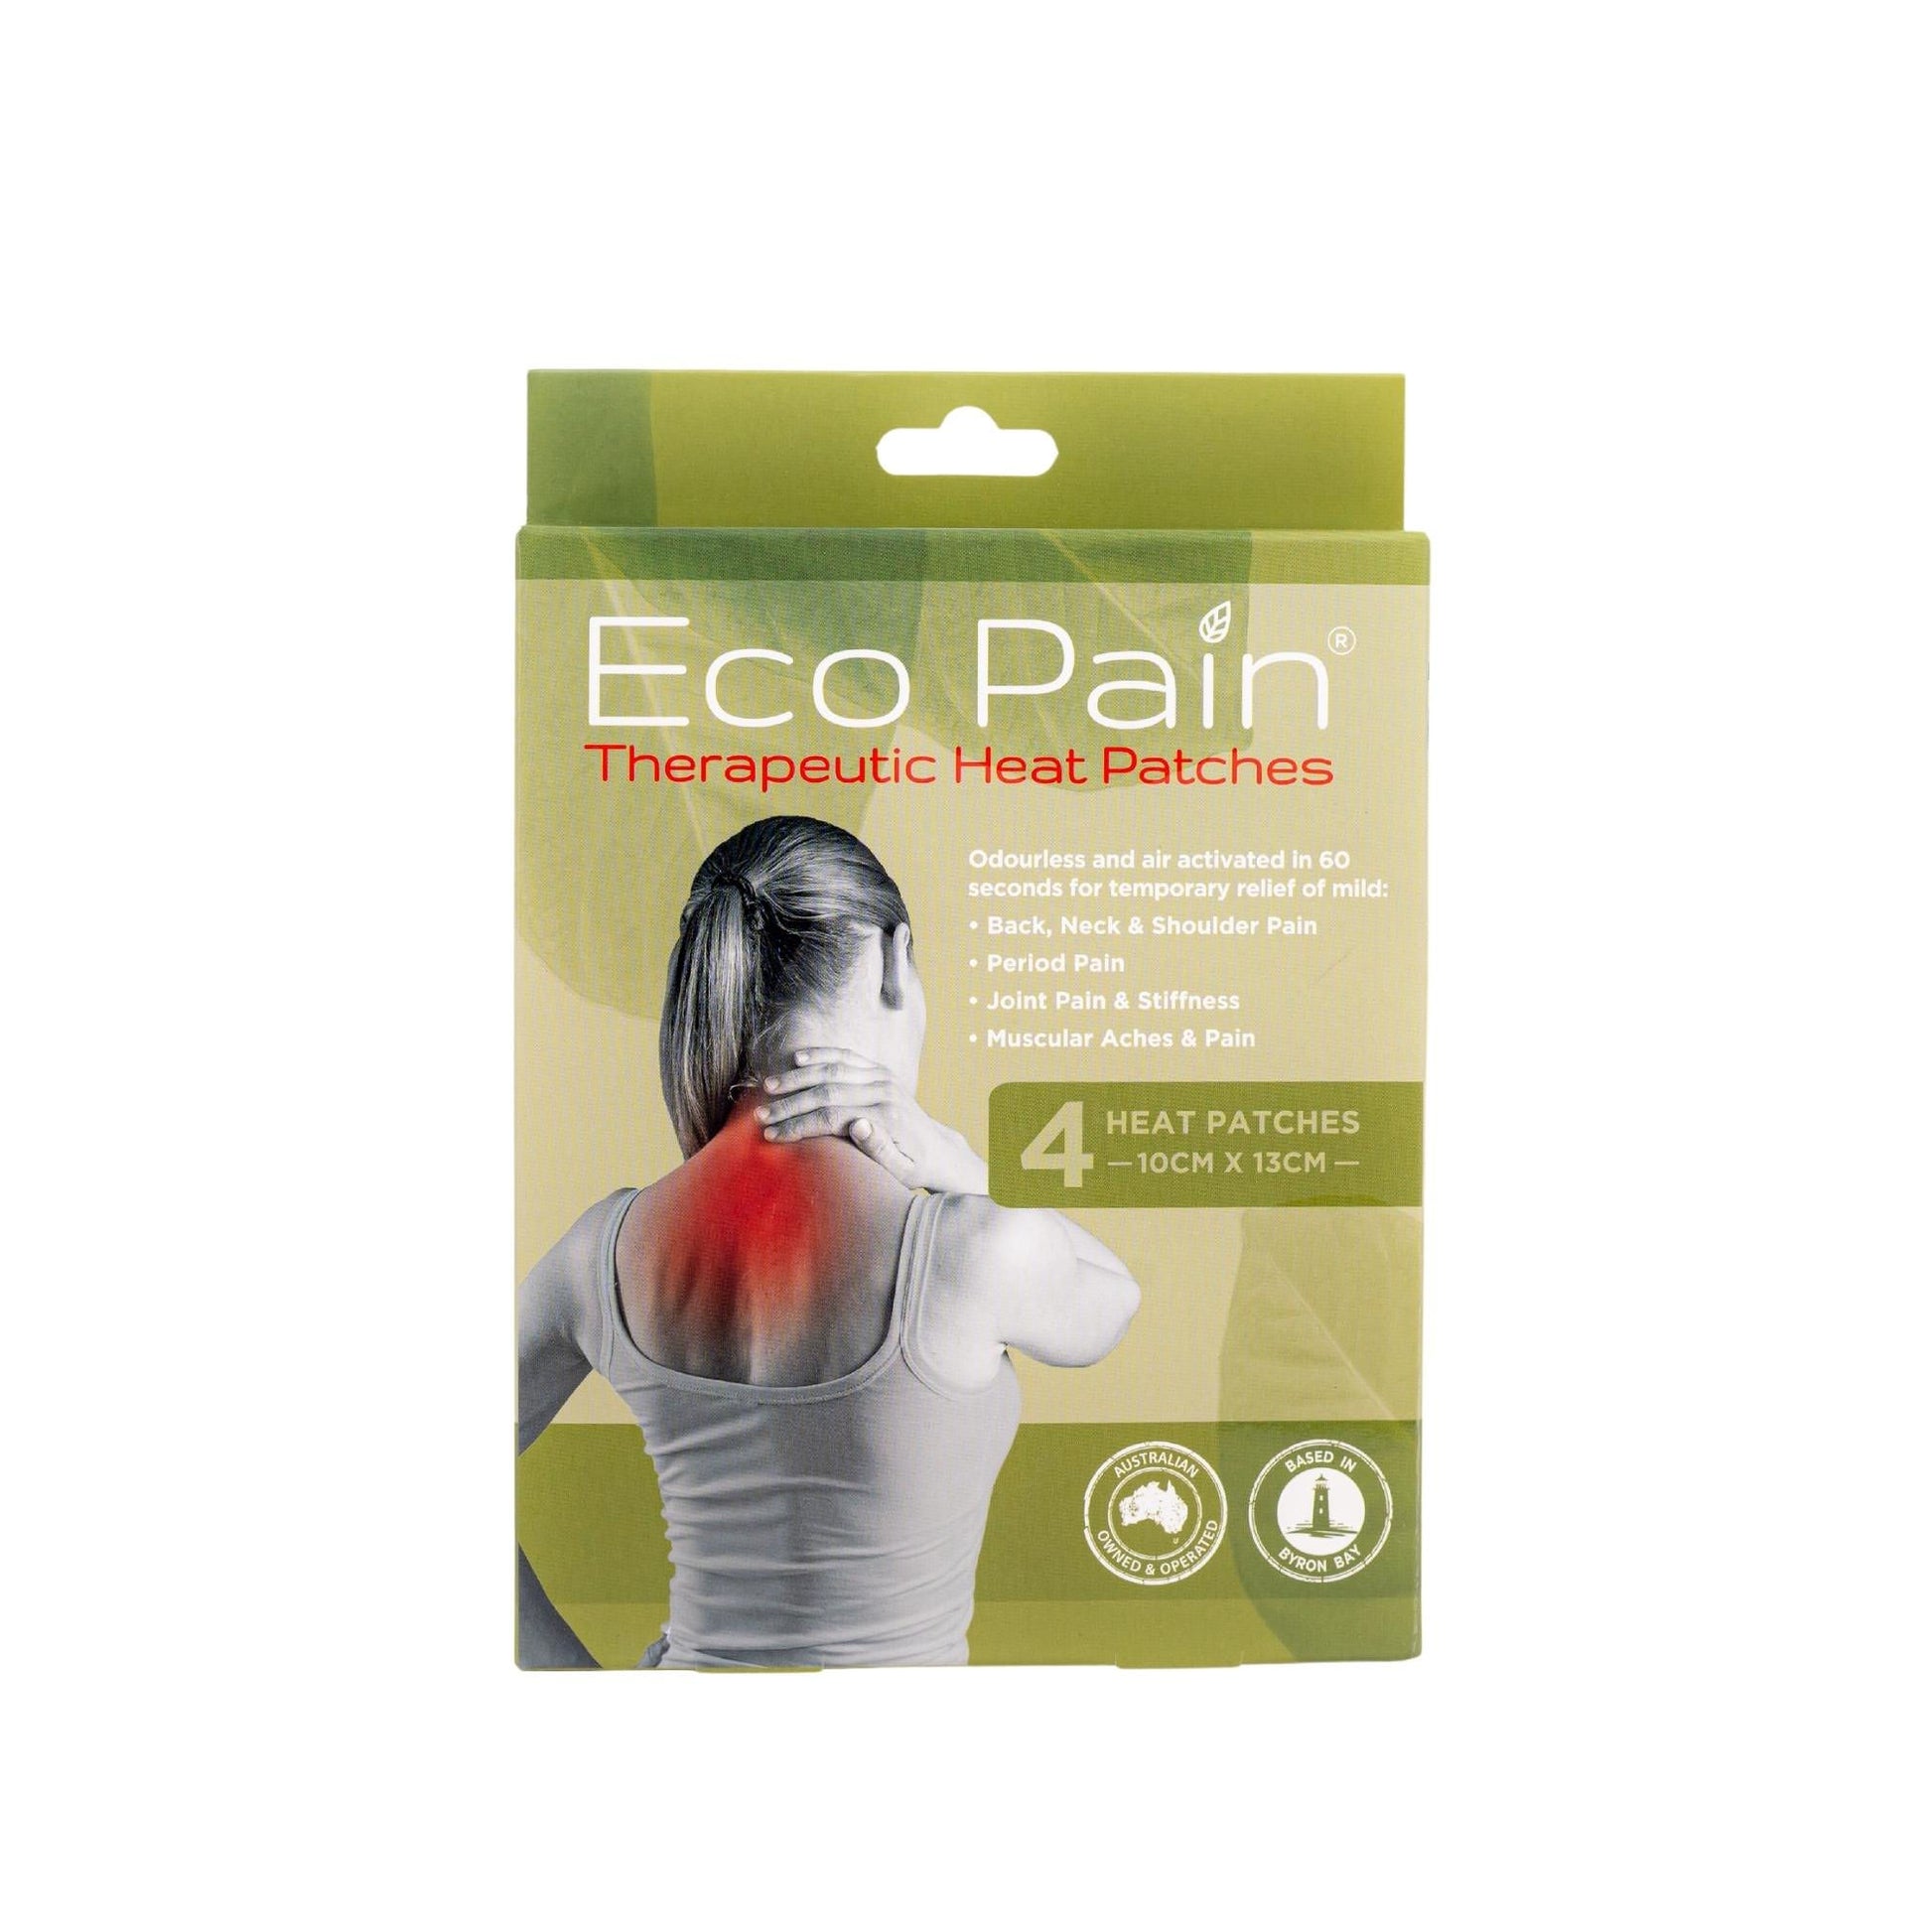 Eco Pain Therapeutic Heat Patches